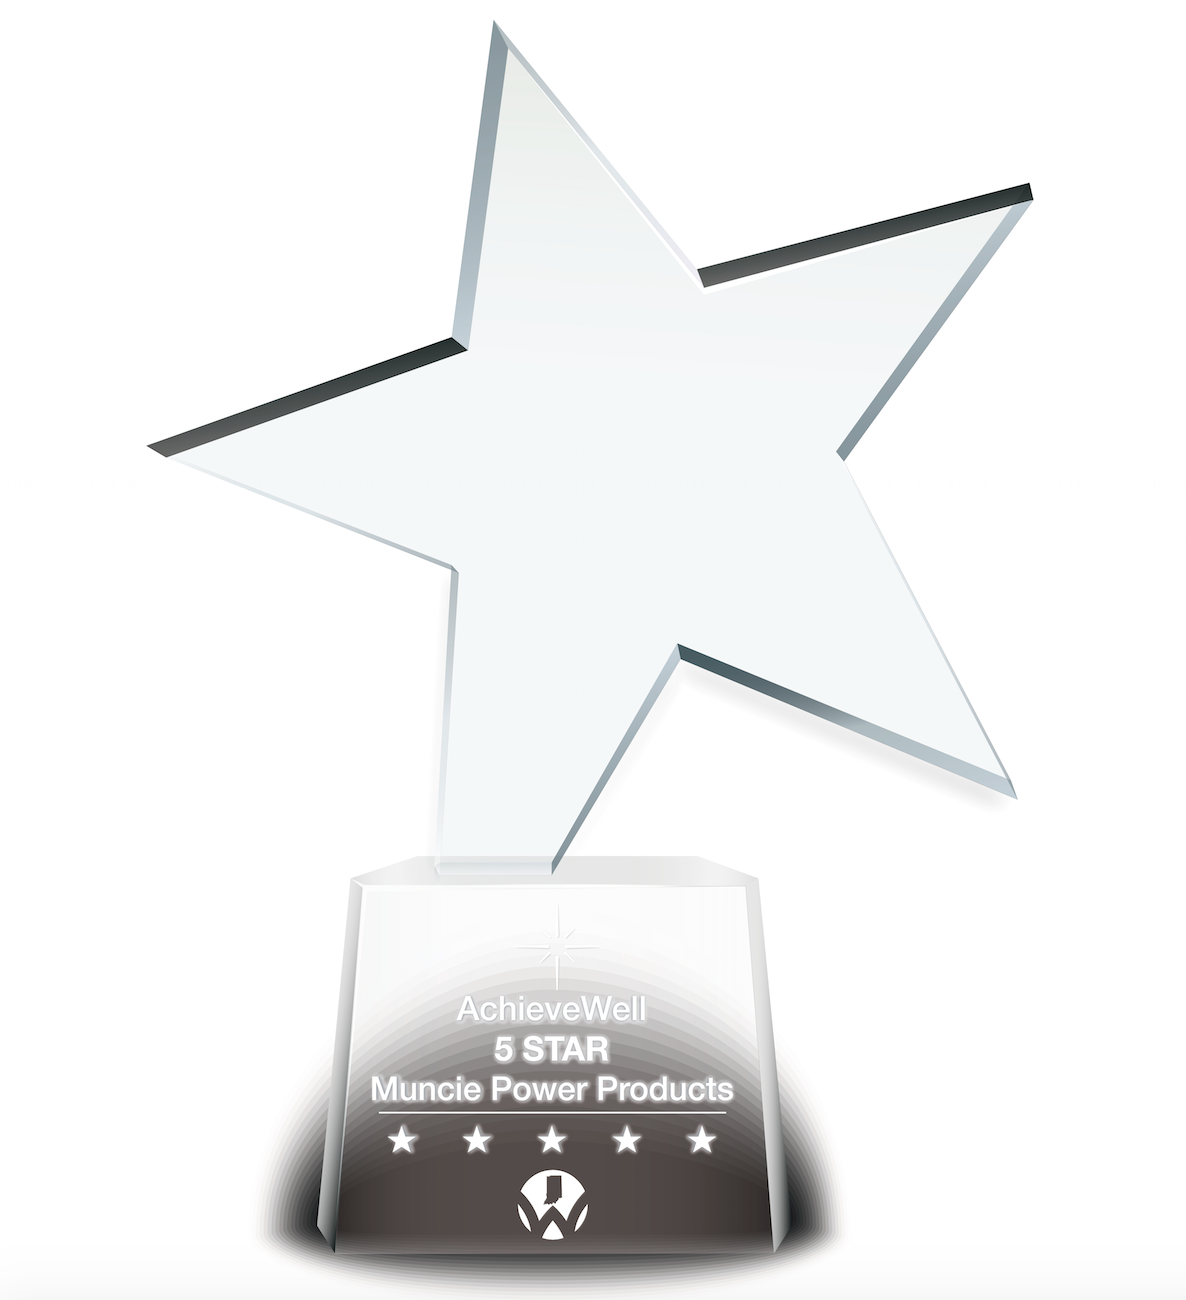 A picture of the five star level AchieveWELL trophy that is awarded to companies who reach this level.